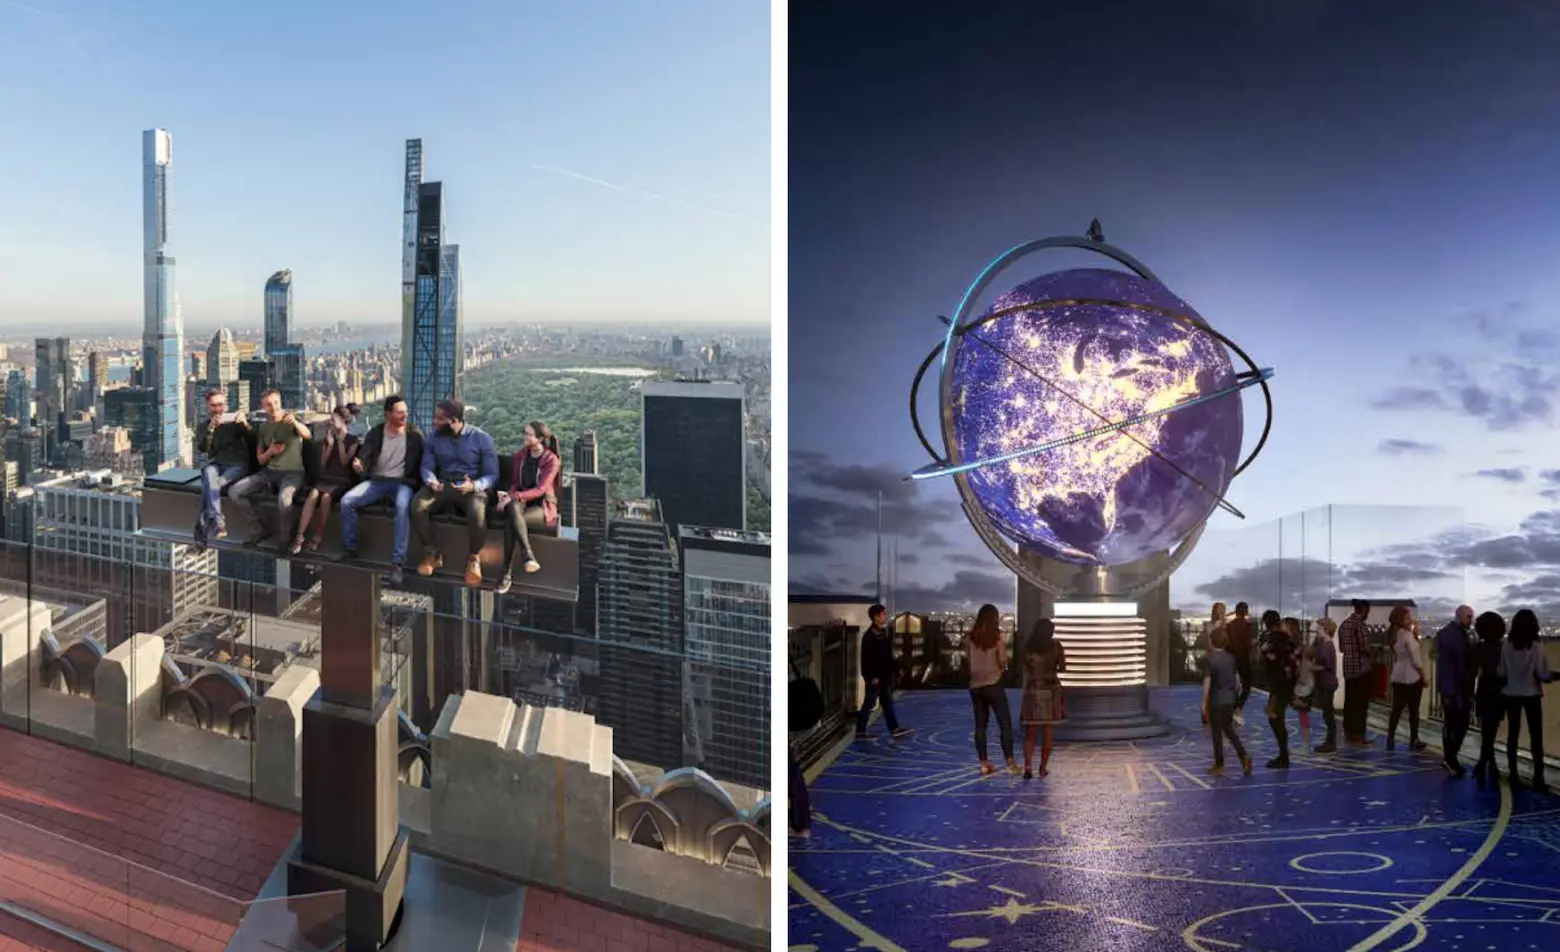 See the new observation deck and rooftop ride proposed for 30 Rock